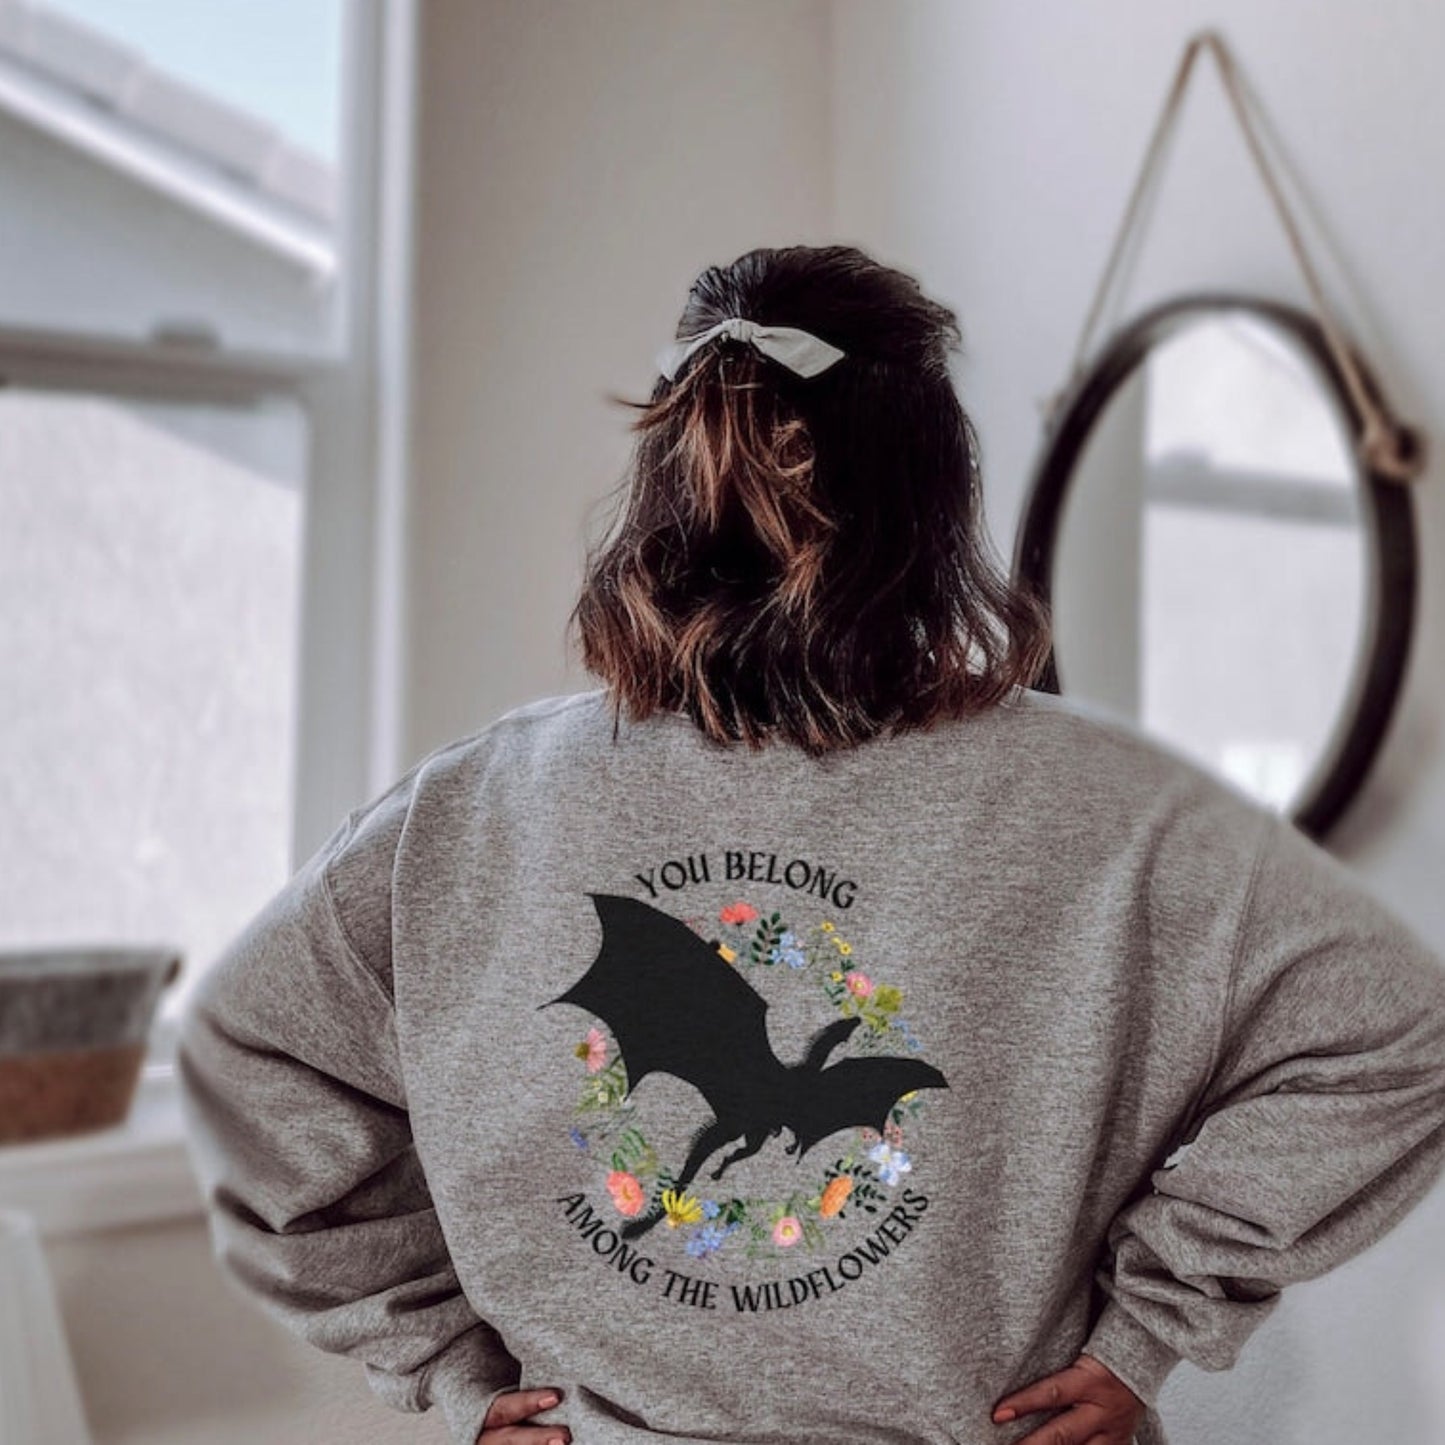 Throne of glass abraxos sweatshirt - officially licensed by Sarah J Maas